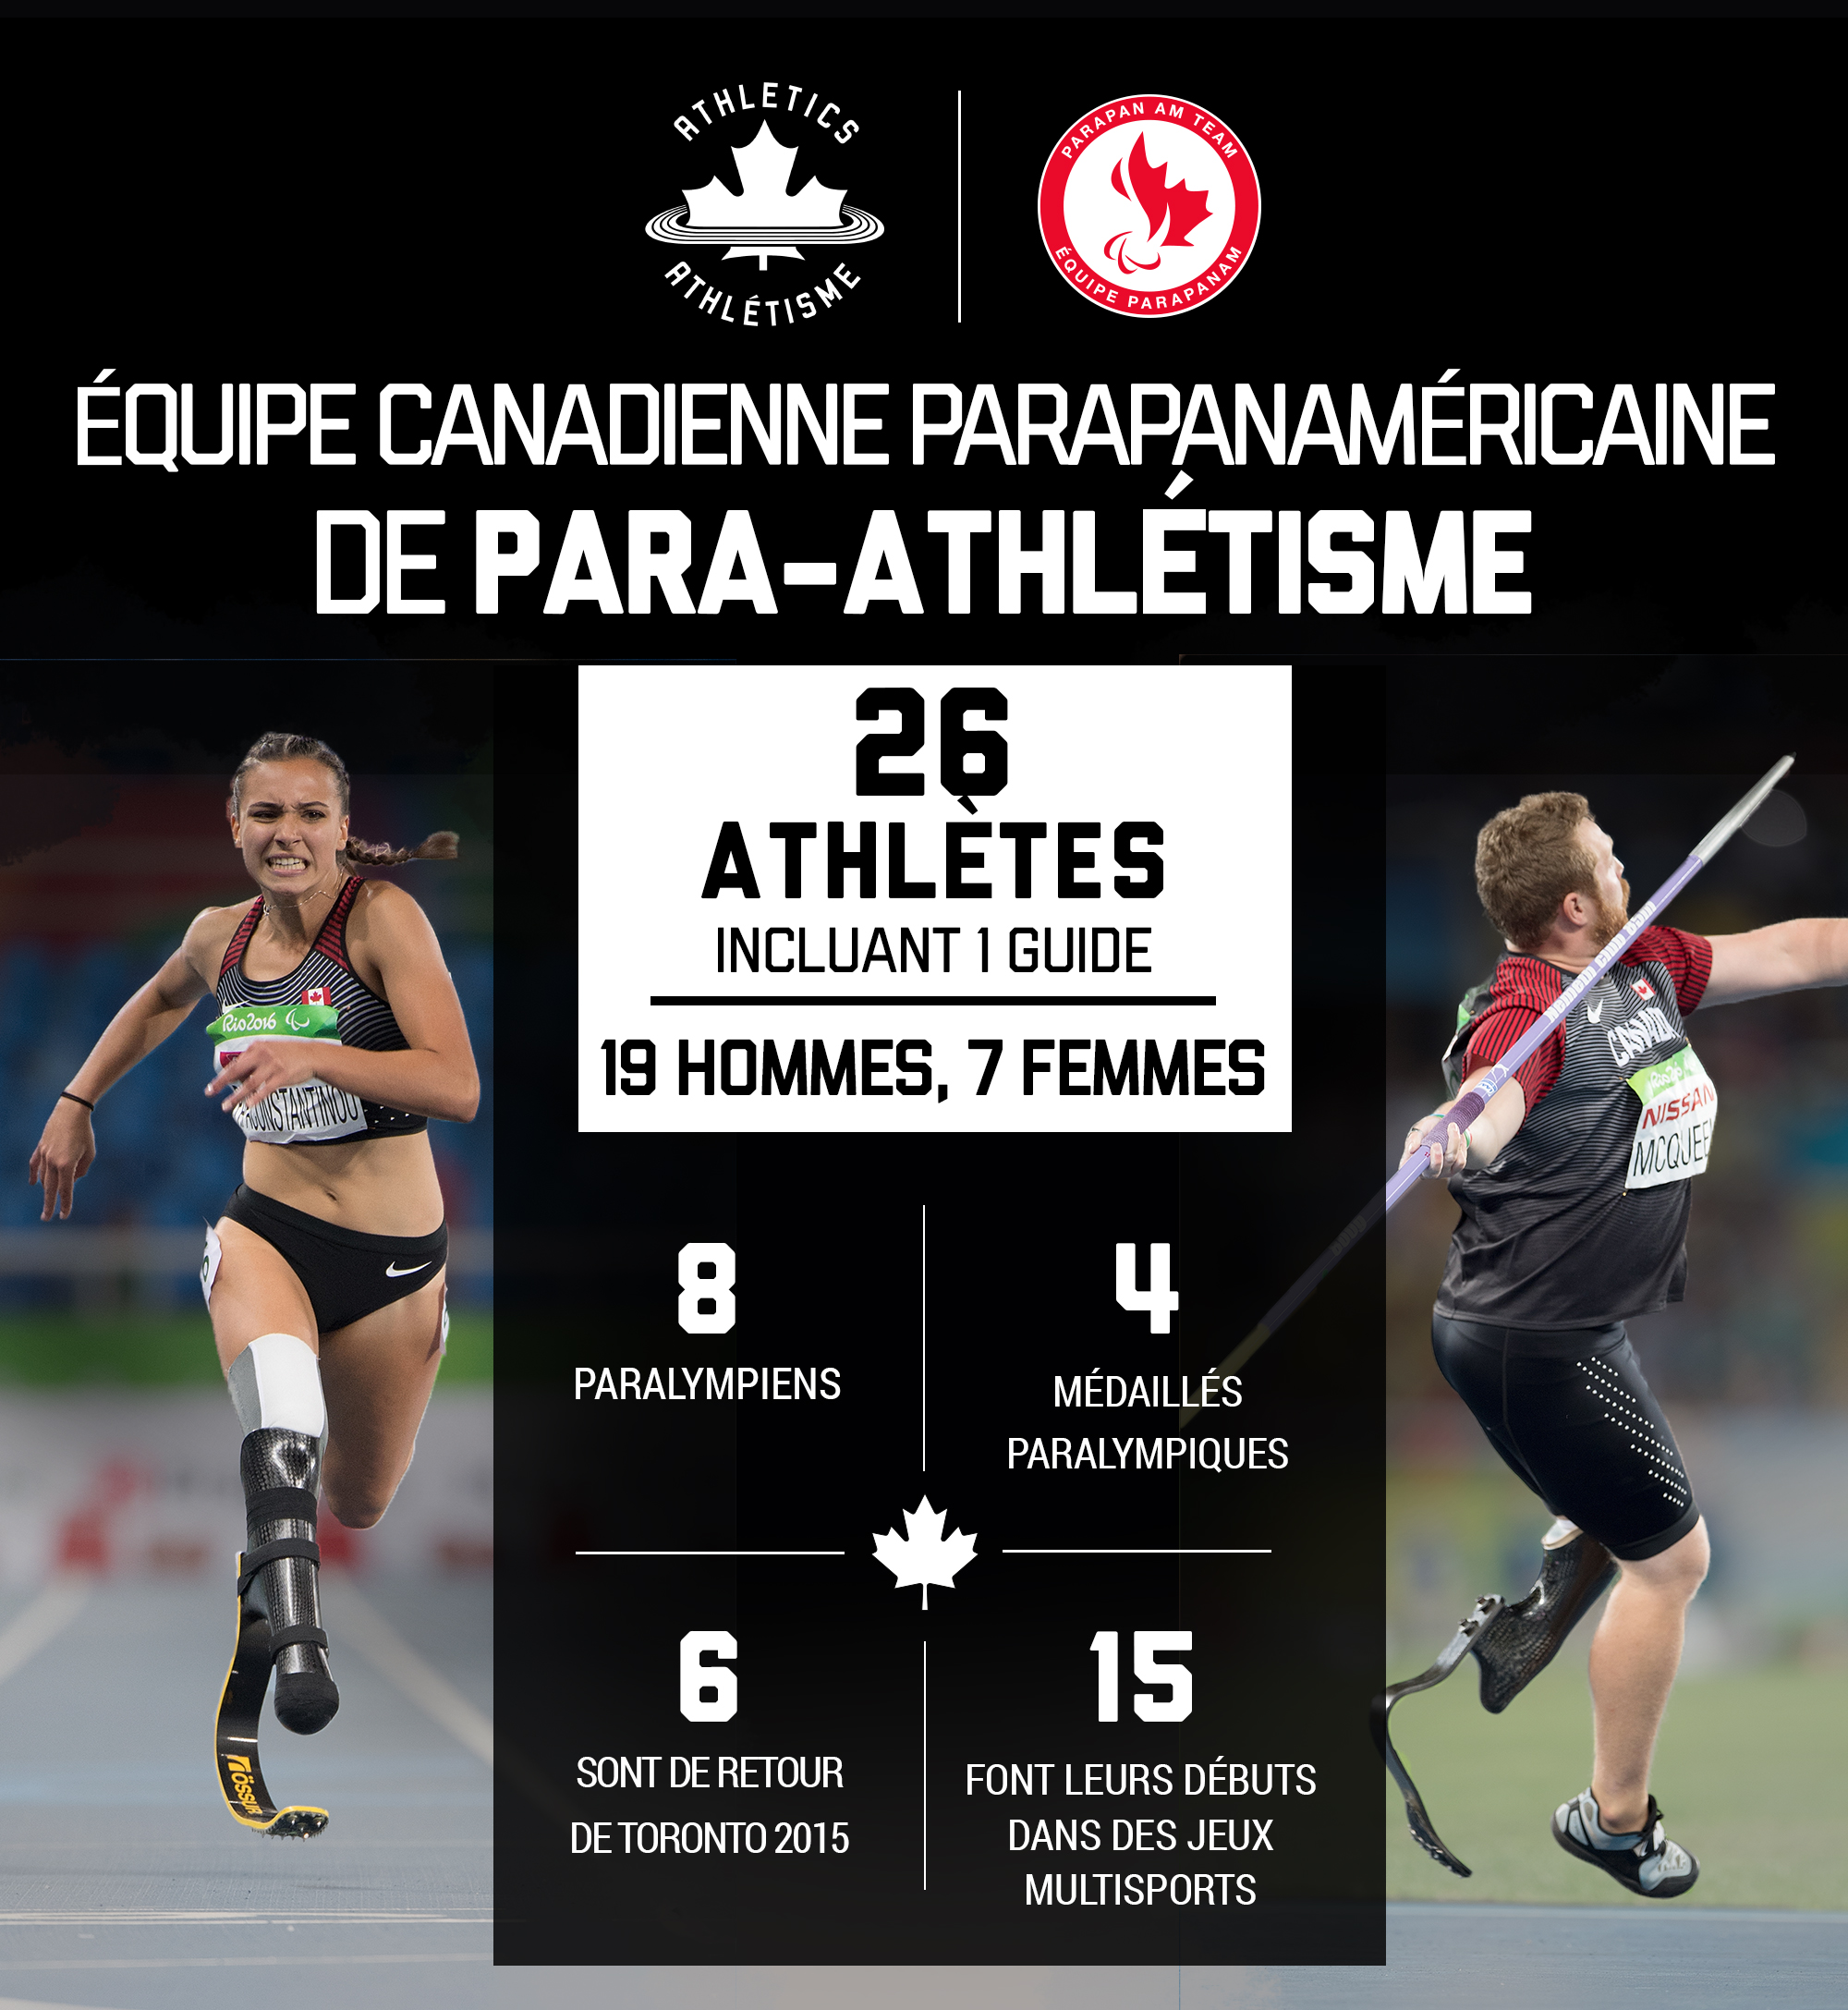 A graphic showing the make-up of the Canadian Parapan Am para athletics team